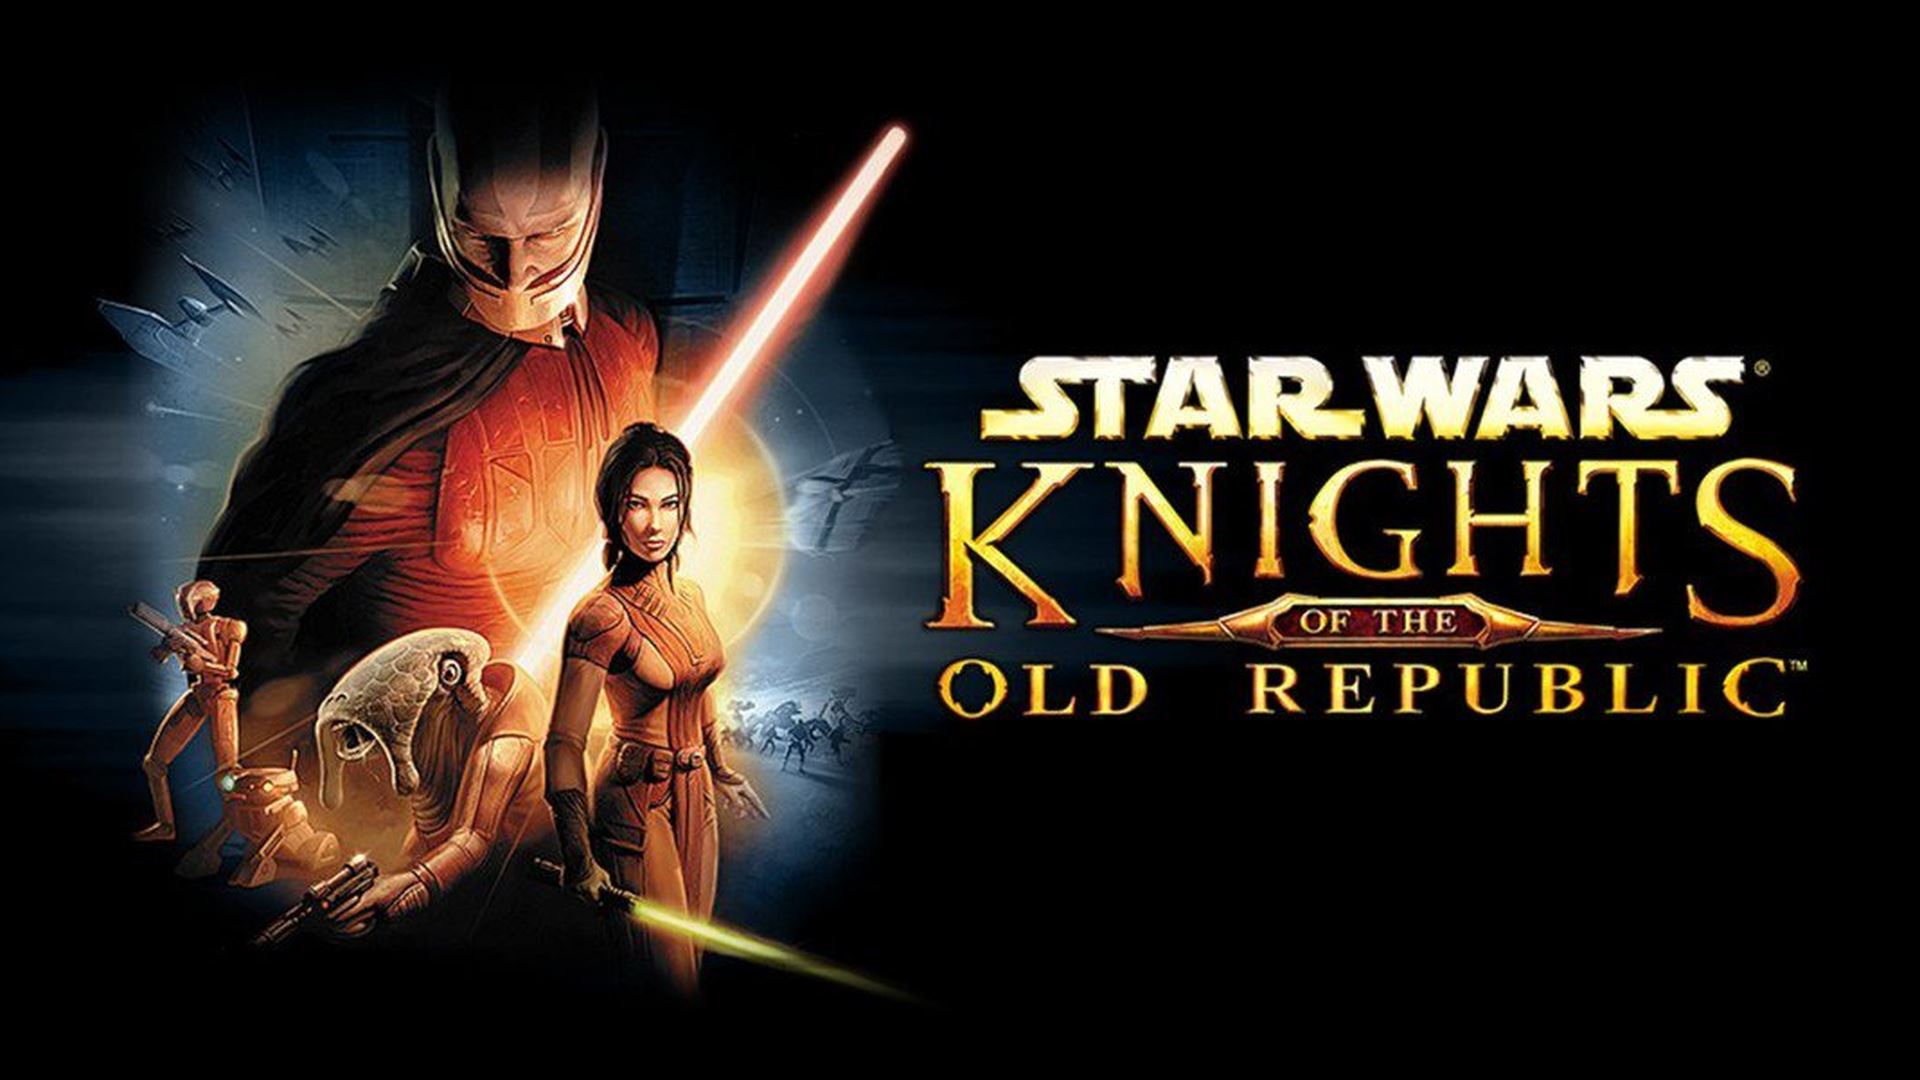 knights of the old republic steam crash